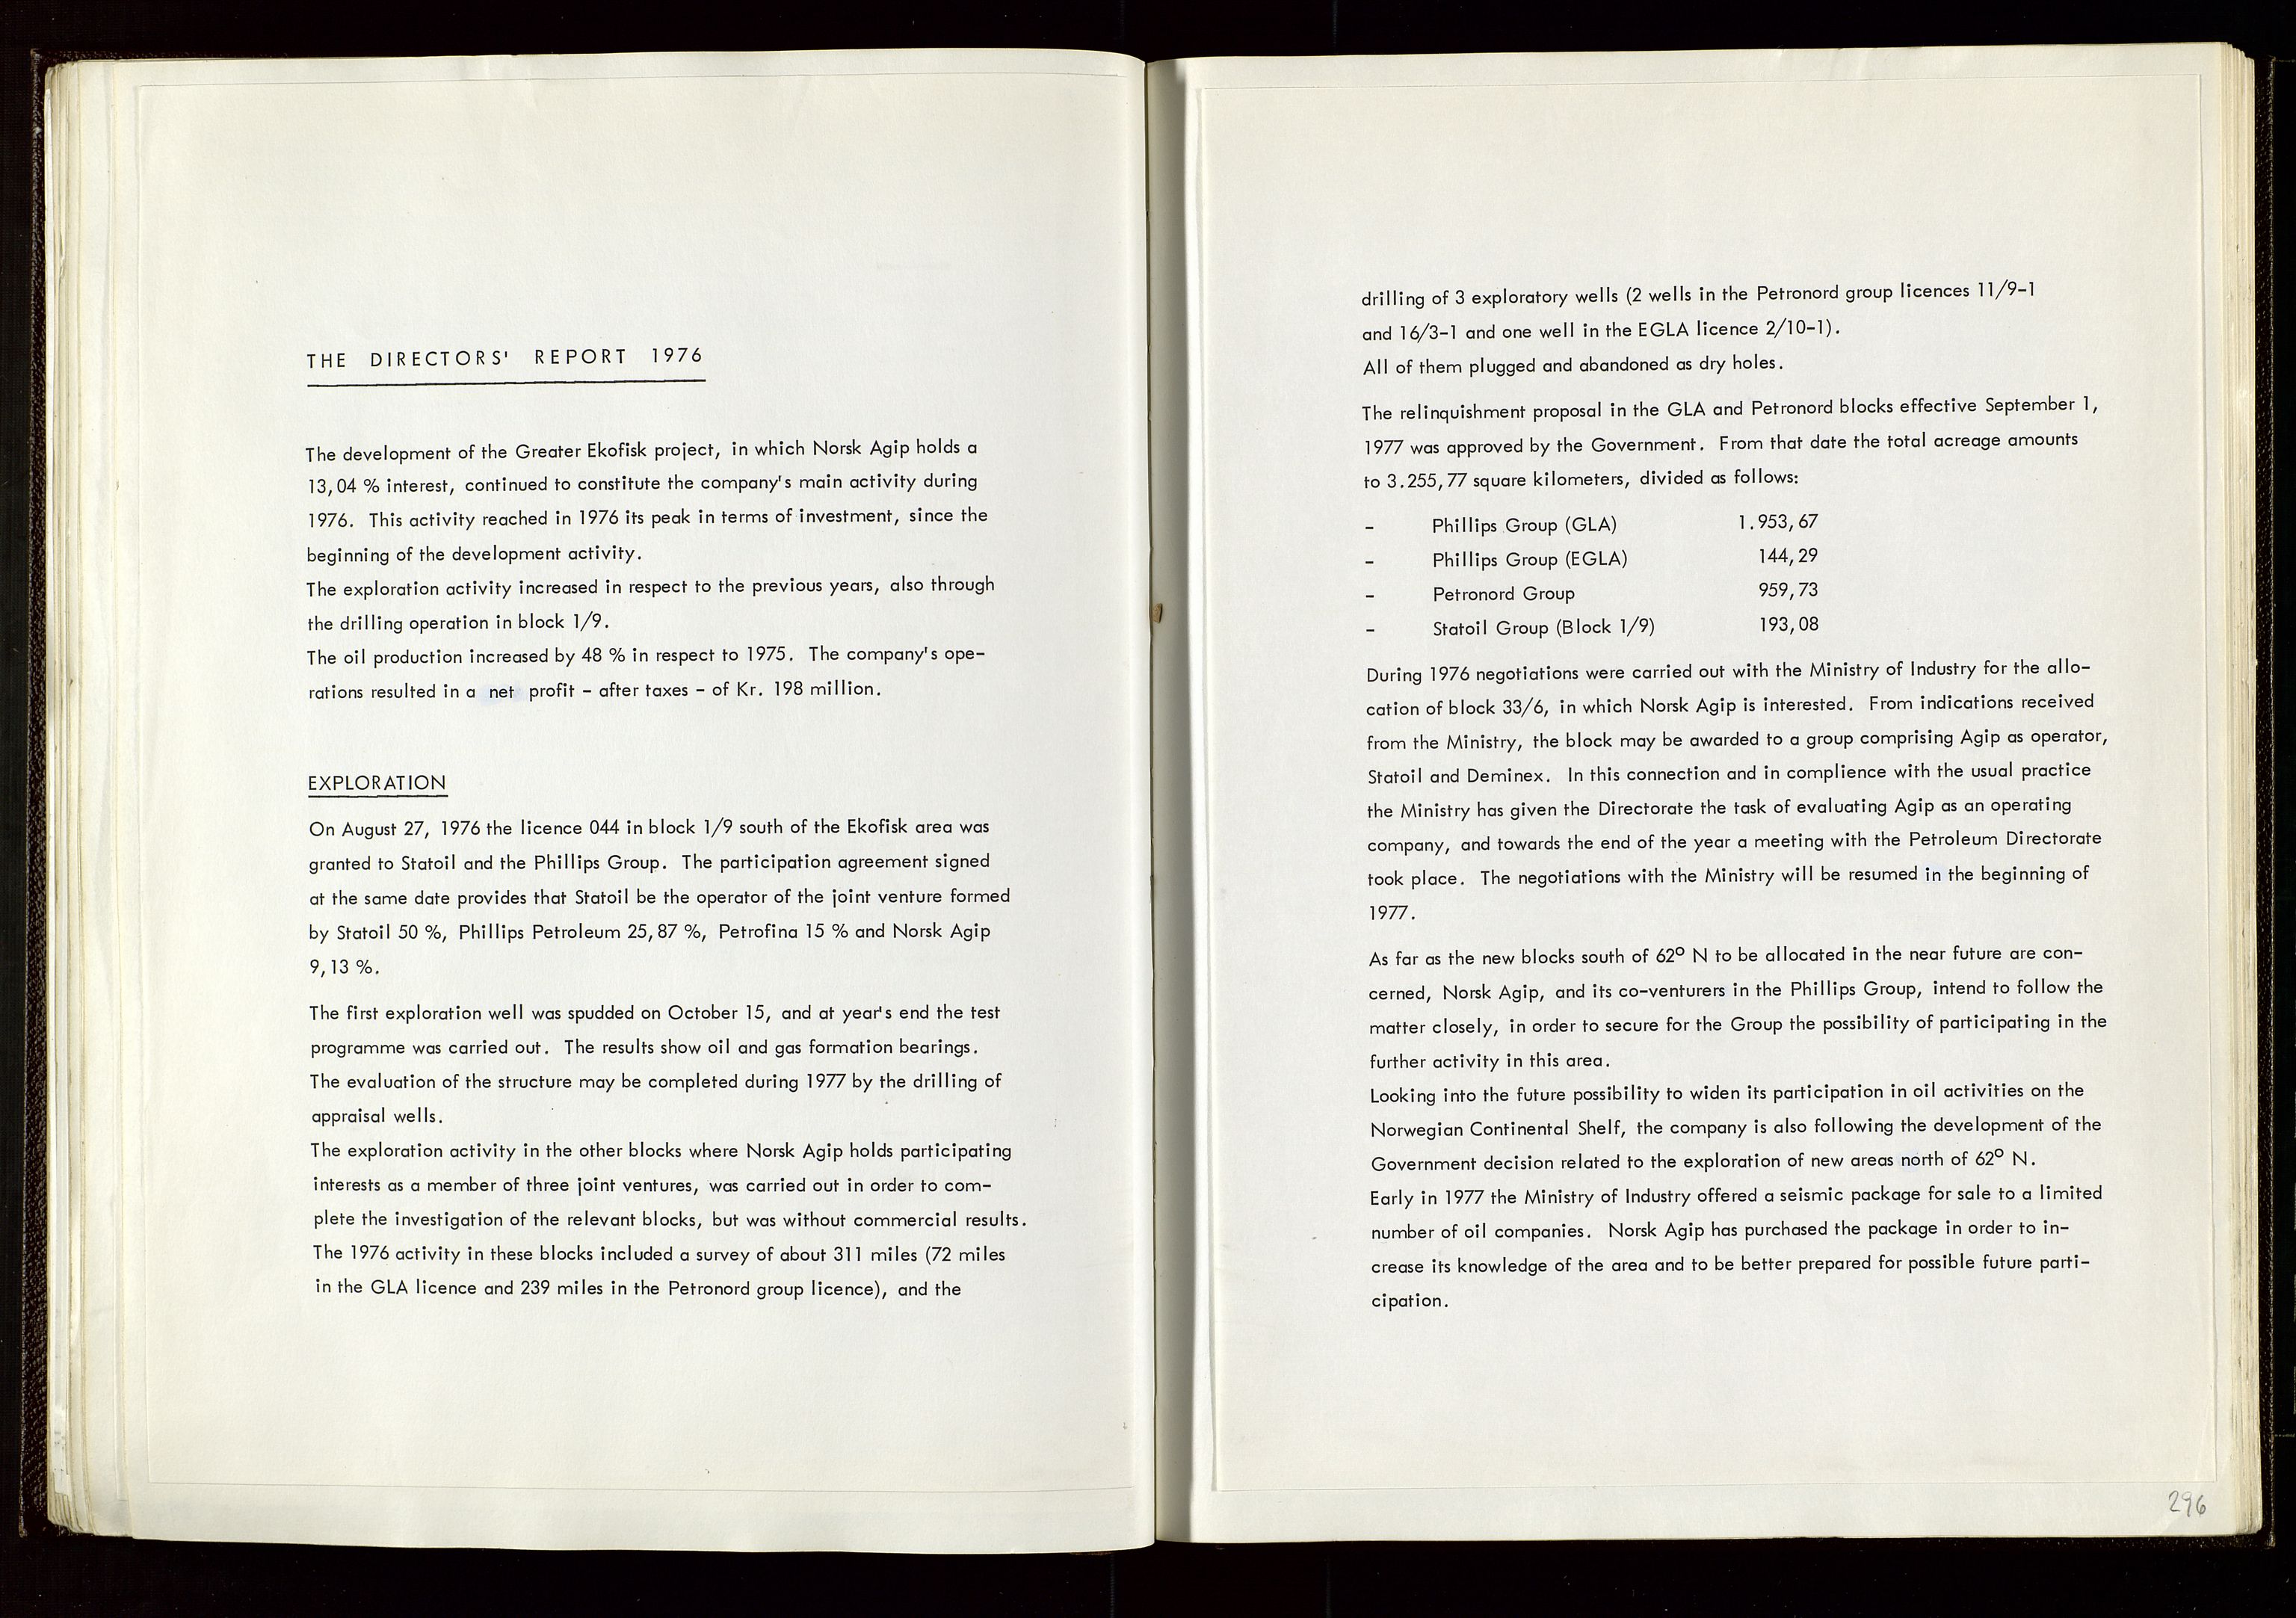 Pa 1583 - Norsk Agip AS, SAST/A-102138/A/Aa/L0002: General assembly and Board of Directors meeting minutes, 1972-1979, p. 295-296